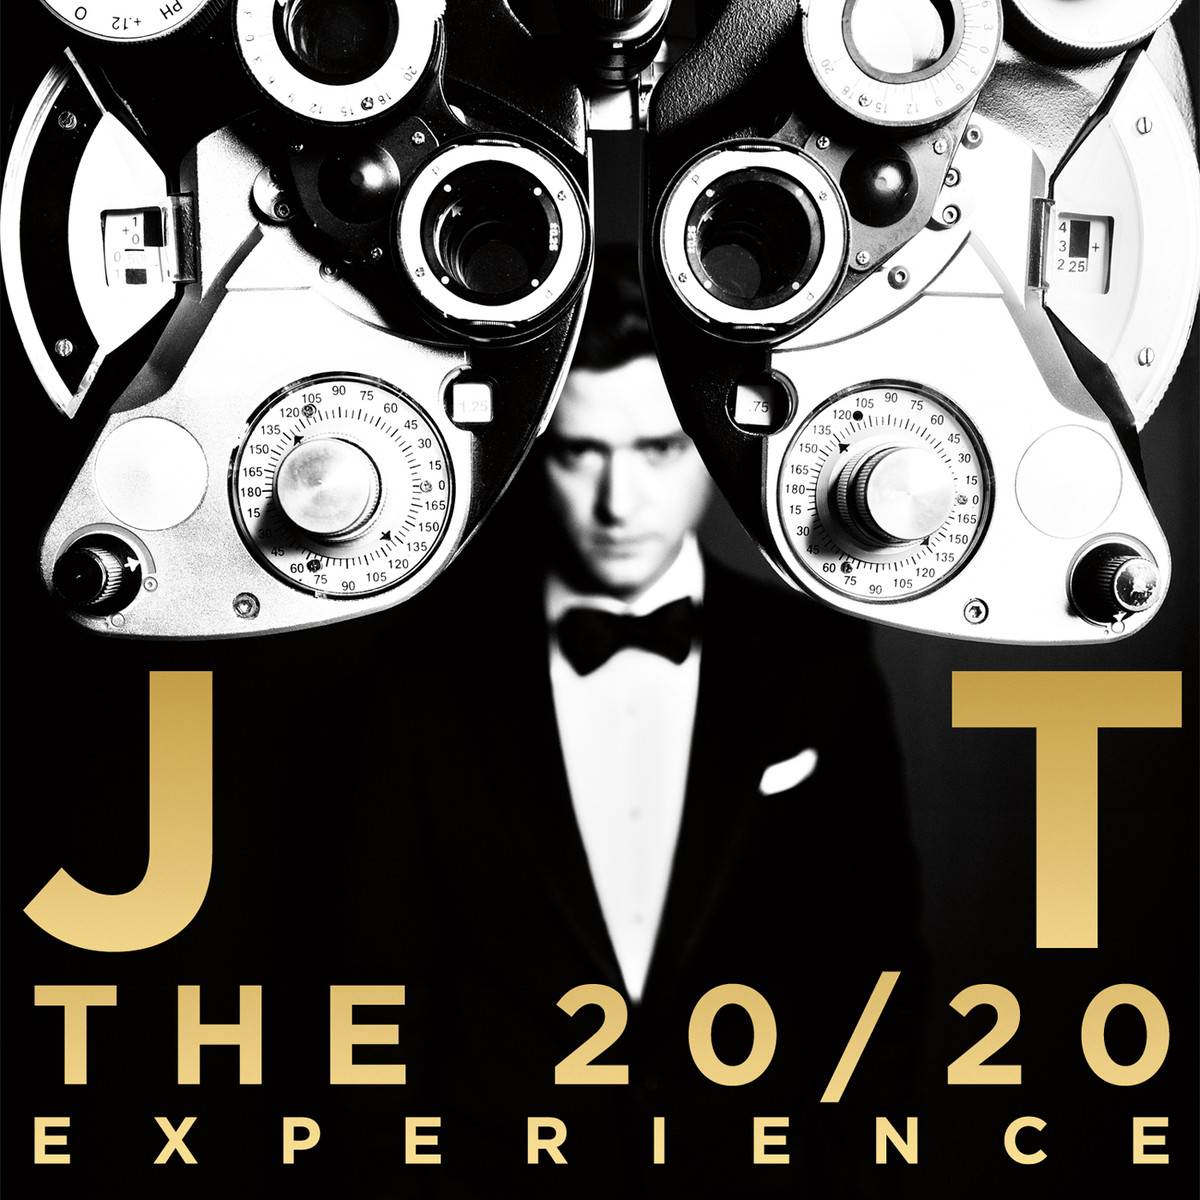 Justin Timberlake - The 20/20 Experience - Deluxe Version